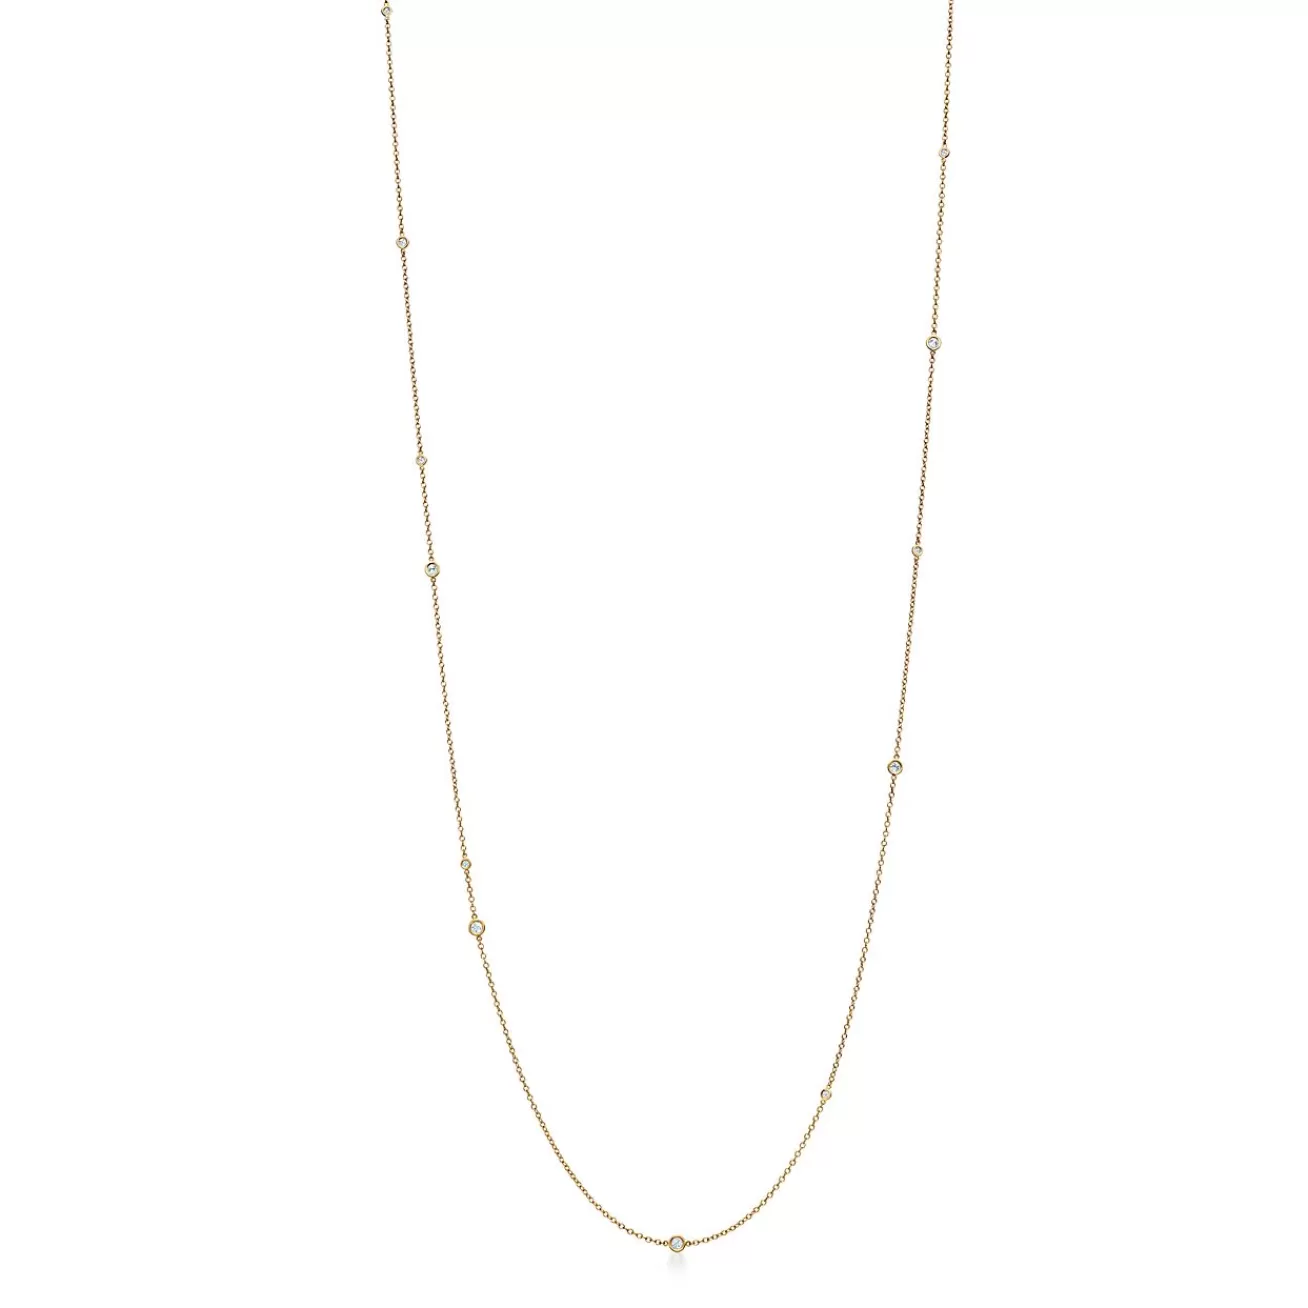 Tiffany & Co. Elsa Peretti® Diamonds by the Yard® sprinkle necklace in 18k gold. | ^ Necklaces & Pendants | Gold Jewelry